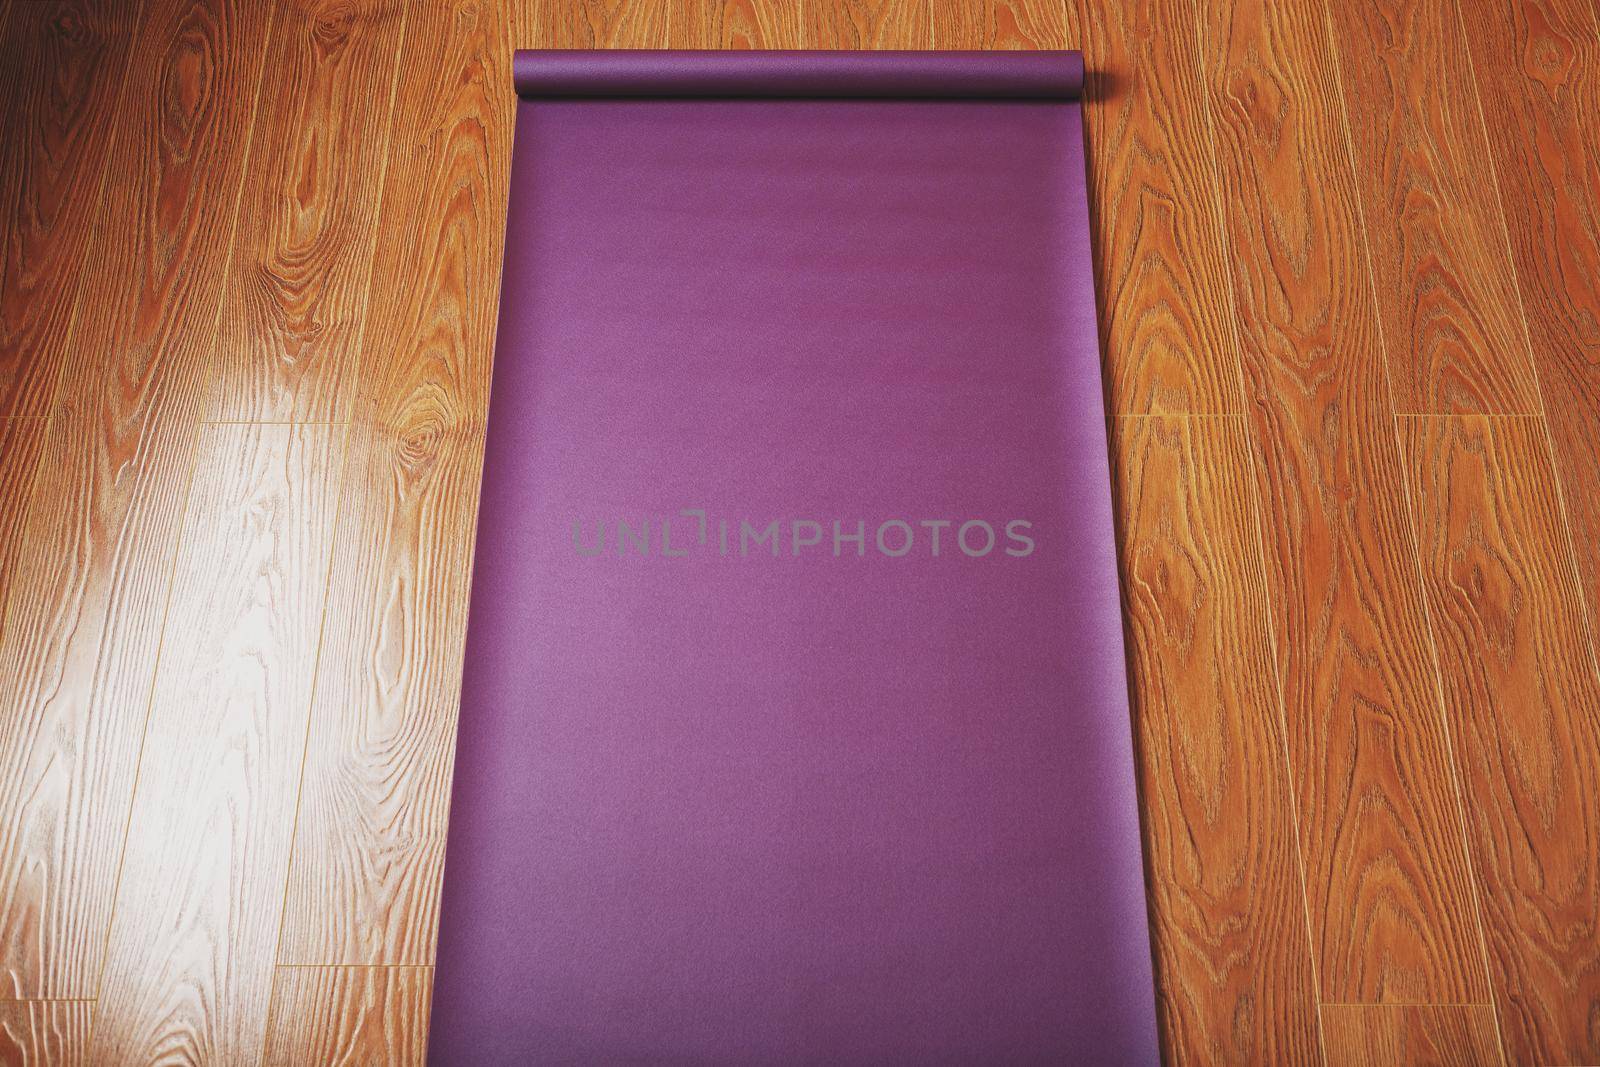 Purple yoga and fitness mat on wooden floor.